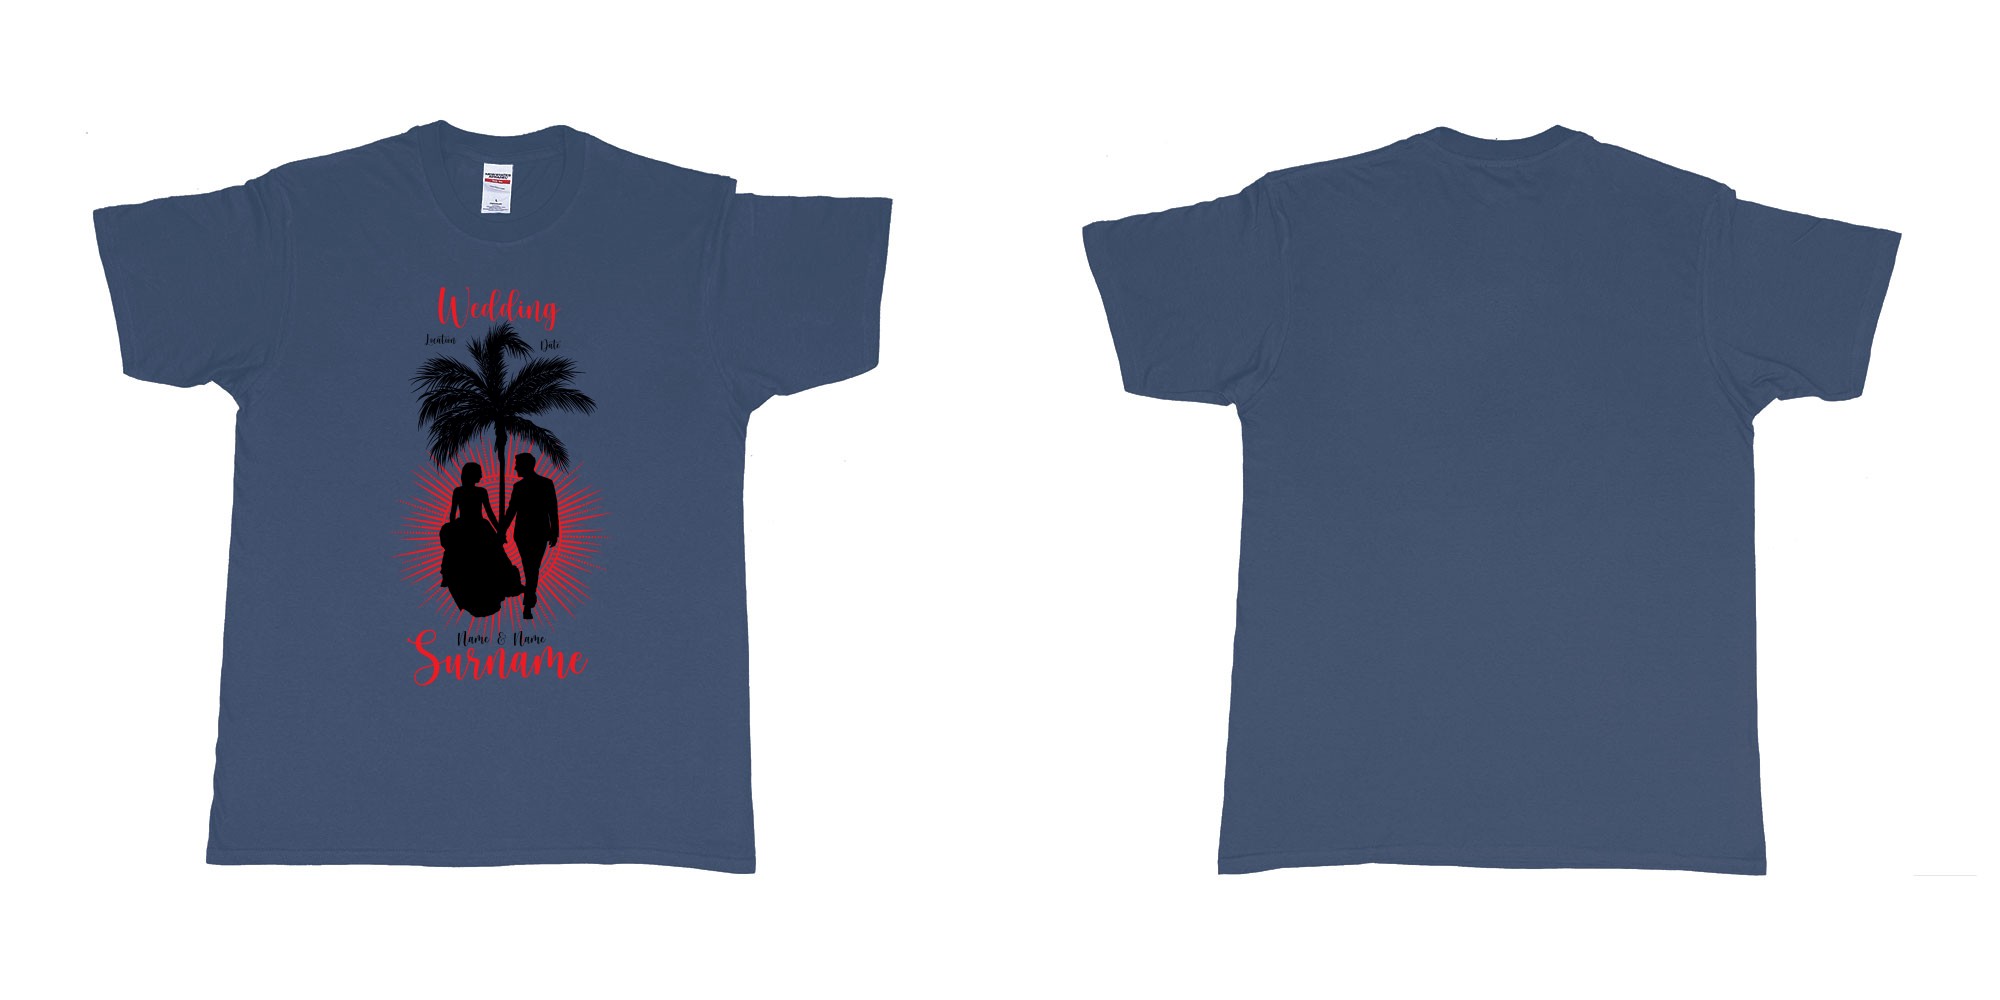 Custom tshirt design wedding palm sun bali in fabric color navy choice your own text made in Bali by The Pirate Way